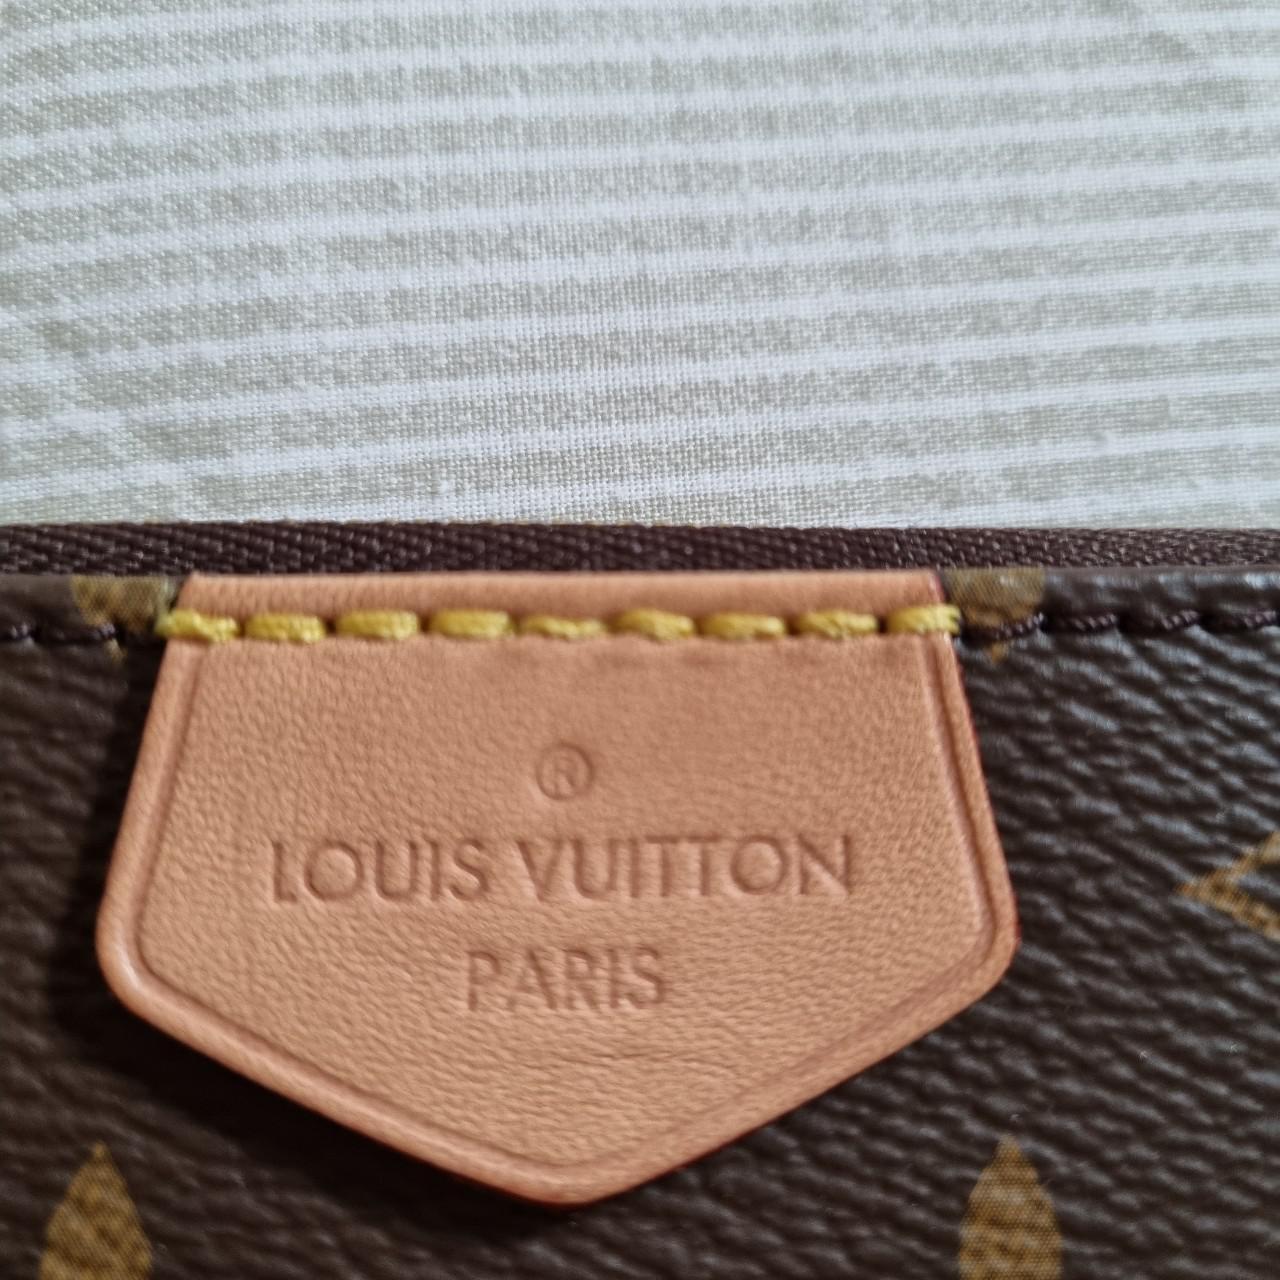 Extra photos of Louis Vuitton small pouch - Depop